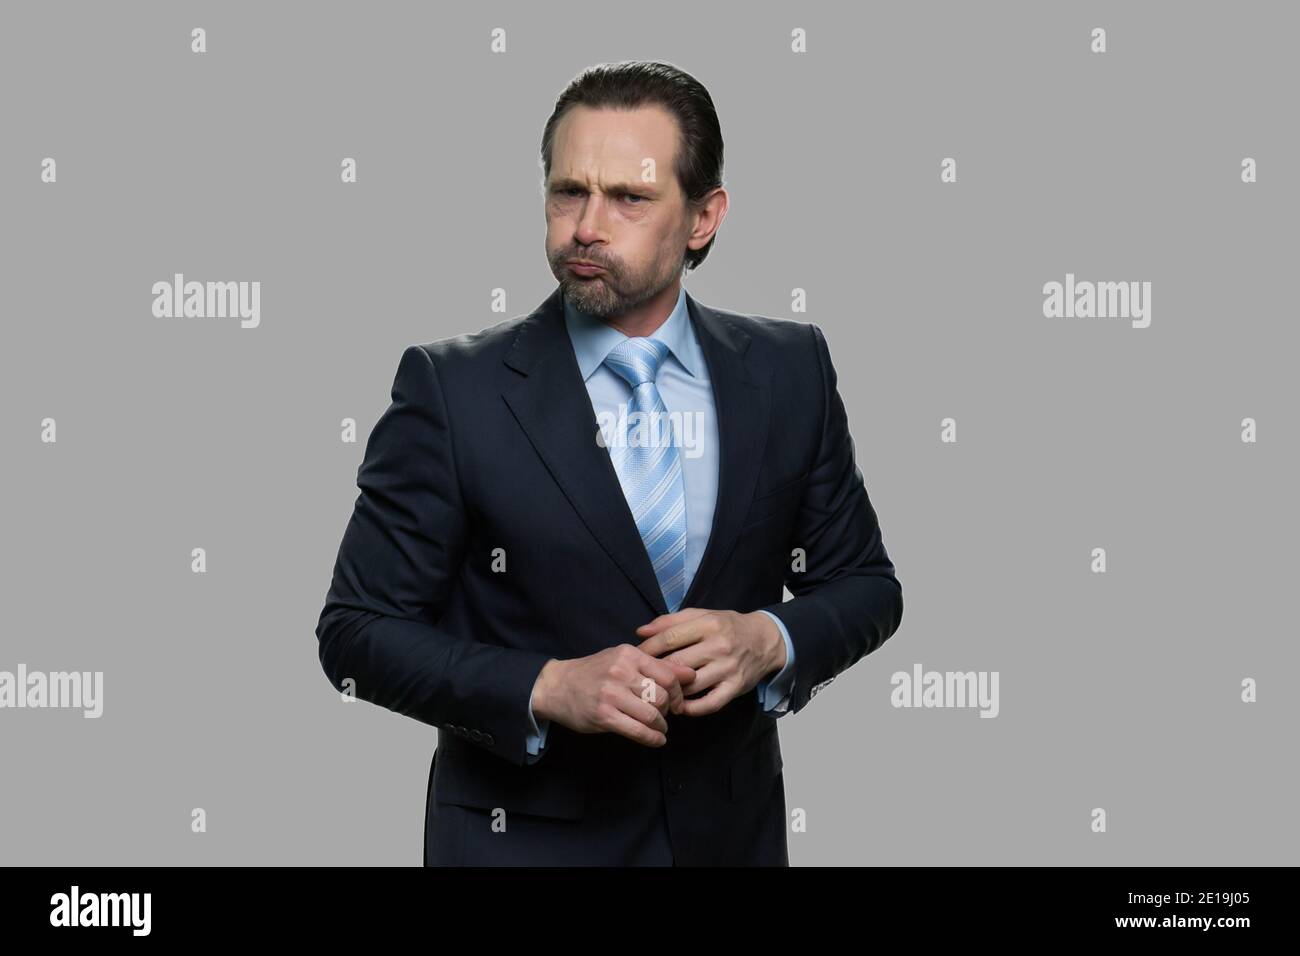 Businessman puffing out cheeks. Stock Photo